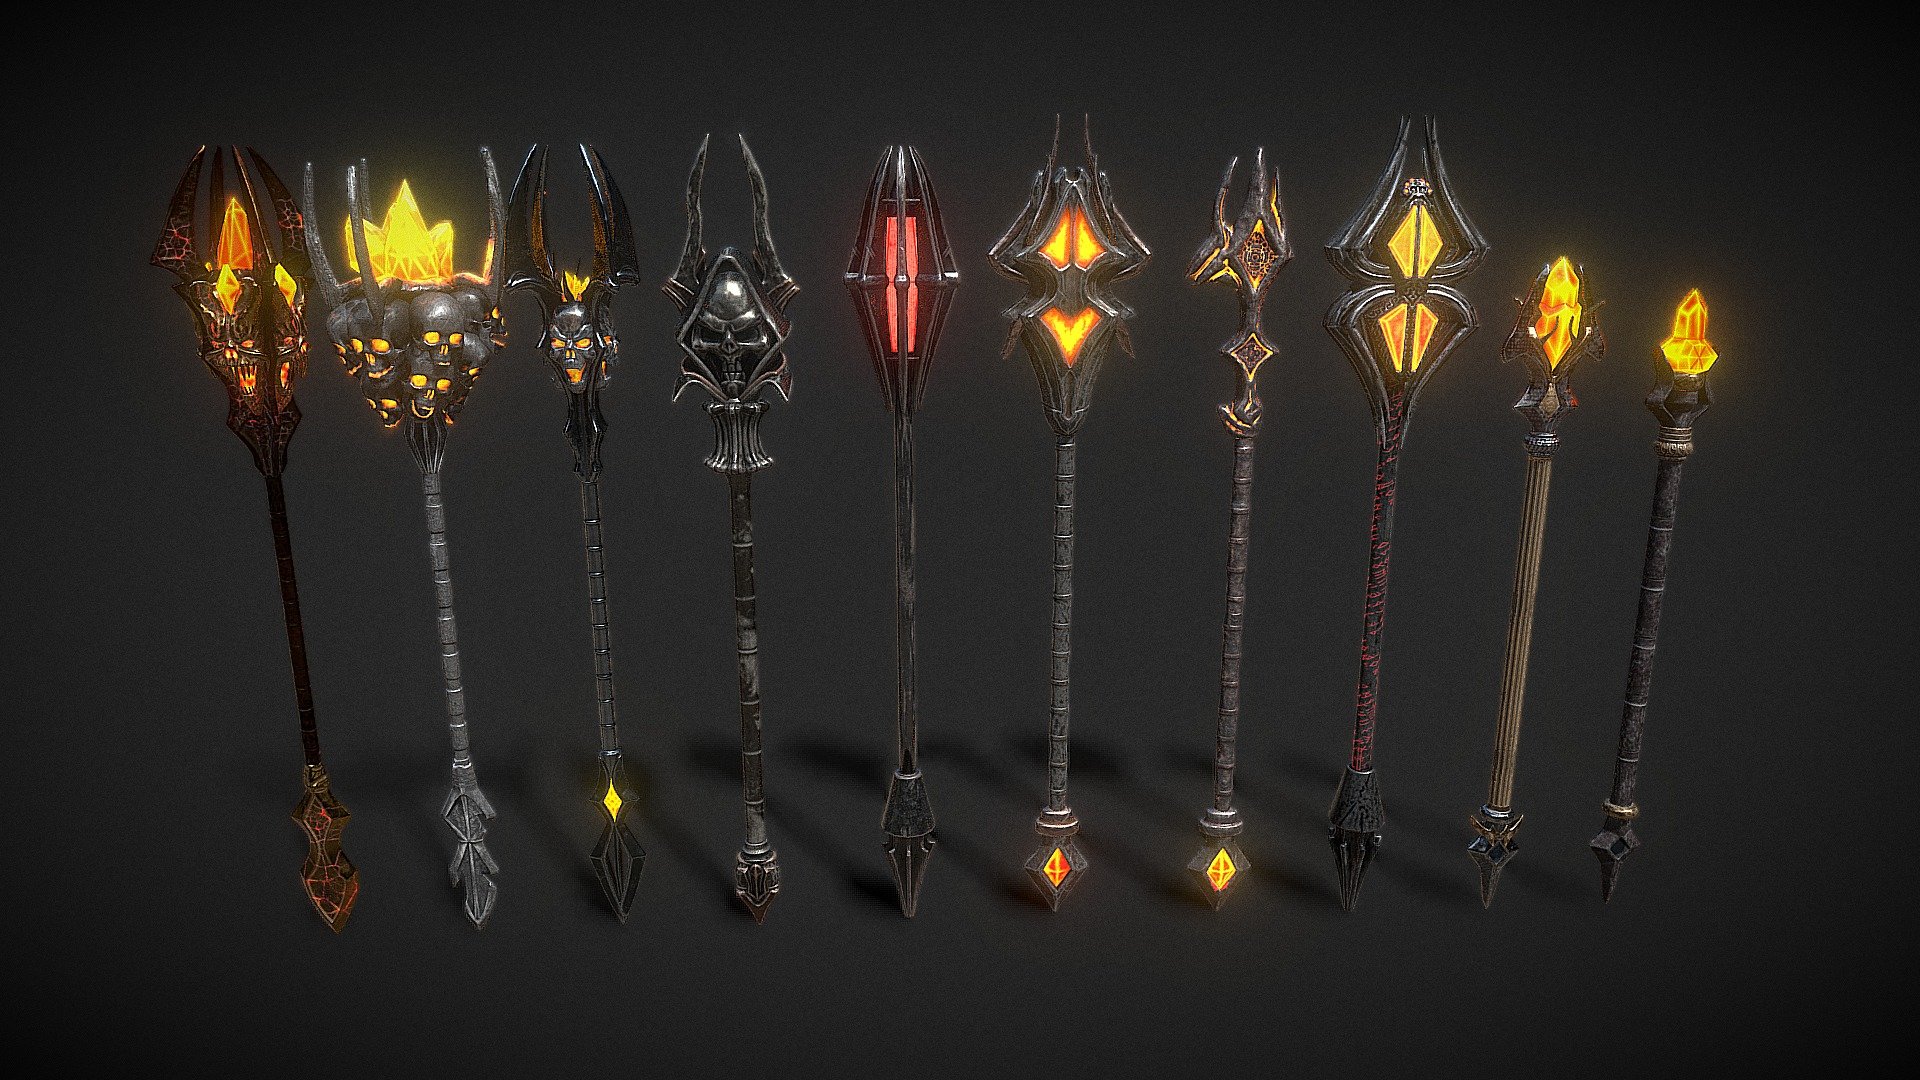 A set of quality staff models. Consists of 10 original objects. Each staff has a PBR texture with a resolution of 2048x2048. Total polygons (triangles) 92,026
staff01 - 21022
staff02 - 23744
staff03 - 11746
staff04 - 8612
staff05 - 4504
staff06 - 6832
staff07 - 3312
staff08 - 6294
staff09 - 4100
staff10 - 1860

The archive contains additional materials: FBX, OBJ, Blend files. 2k textures - PNG, JPG and PNG (Unity Metallic Smoothness) - Fantasy Staffs Pack01 - 3D model by zilbeerman 3d model